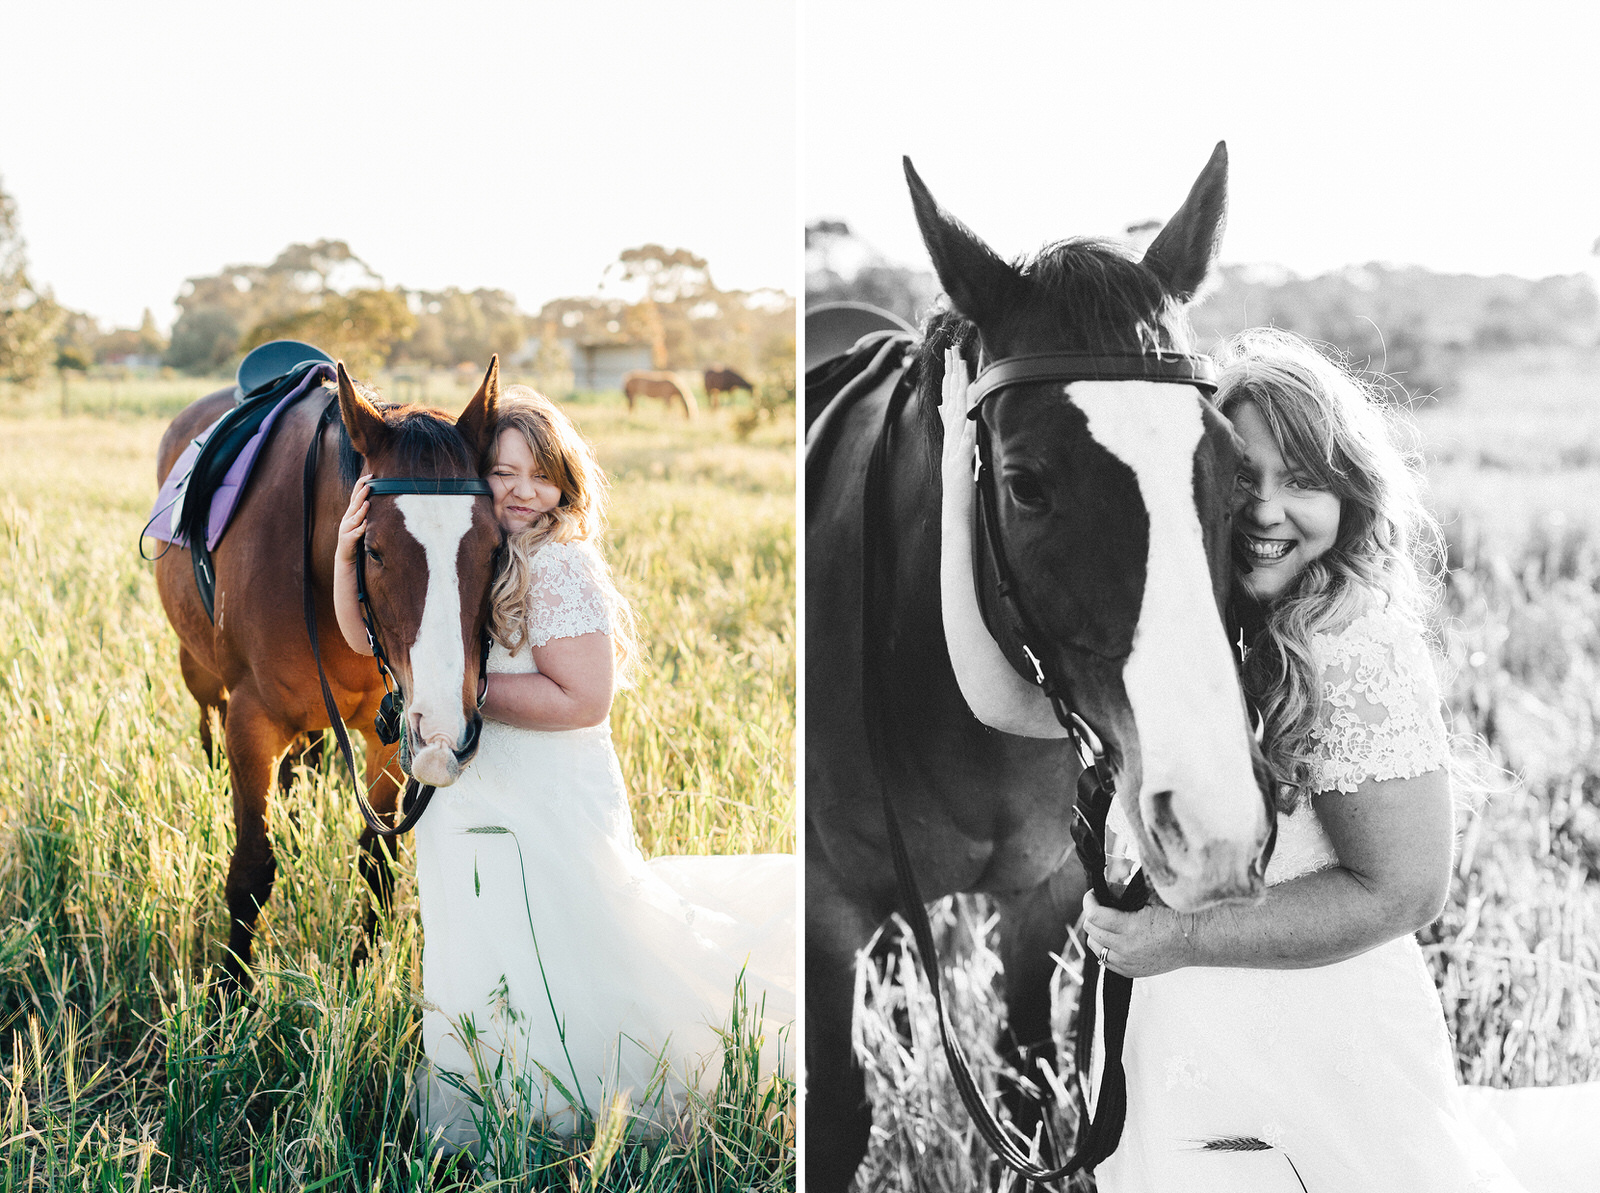 095 Wedding Photographer Adelaide - Year in Review 2016.jpg